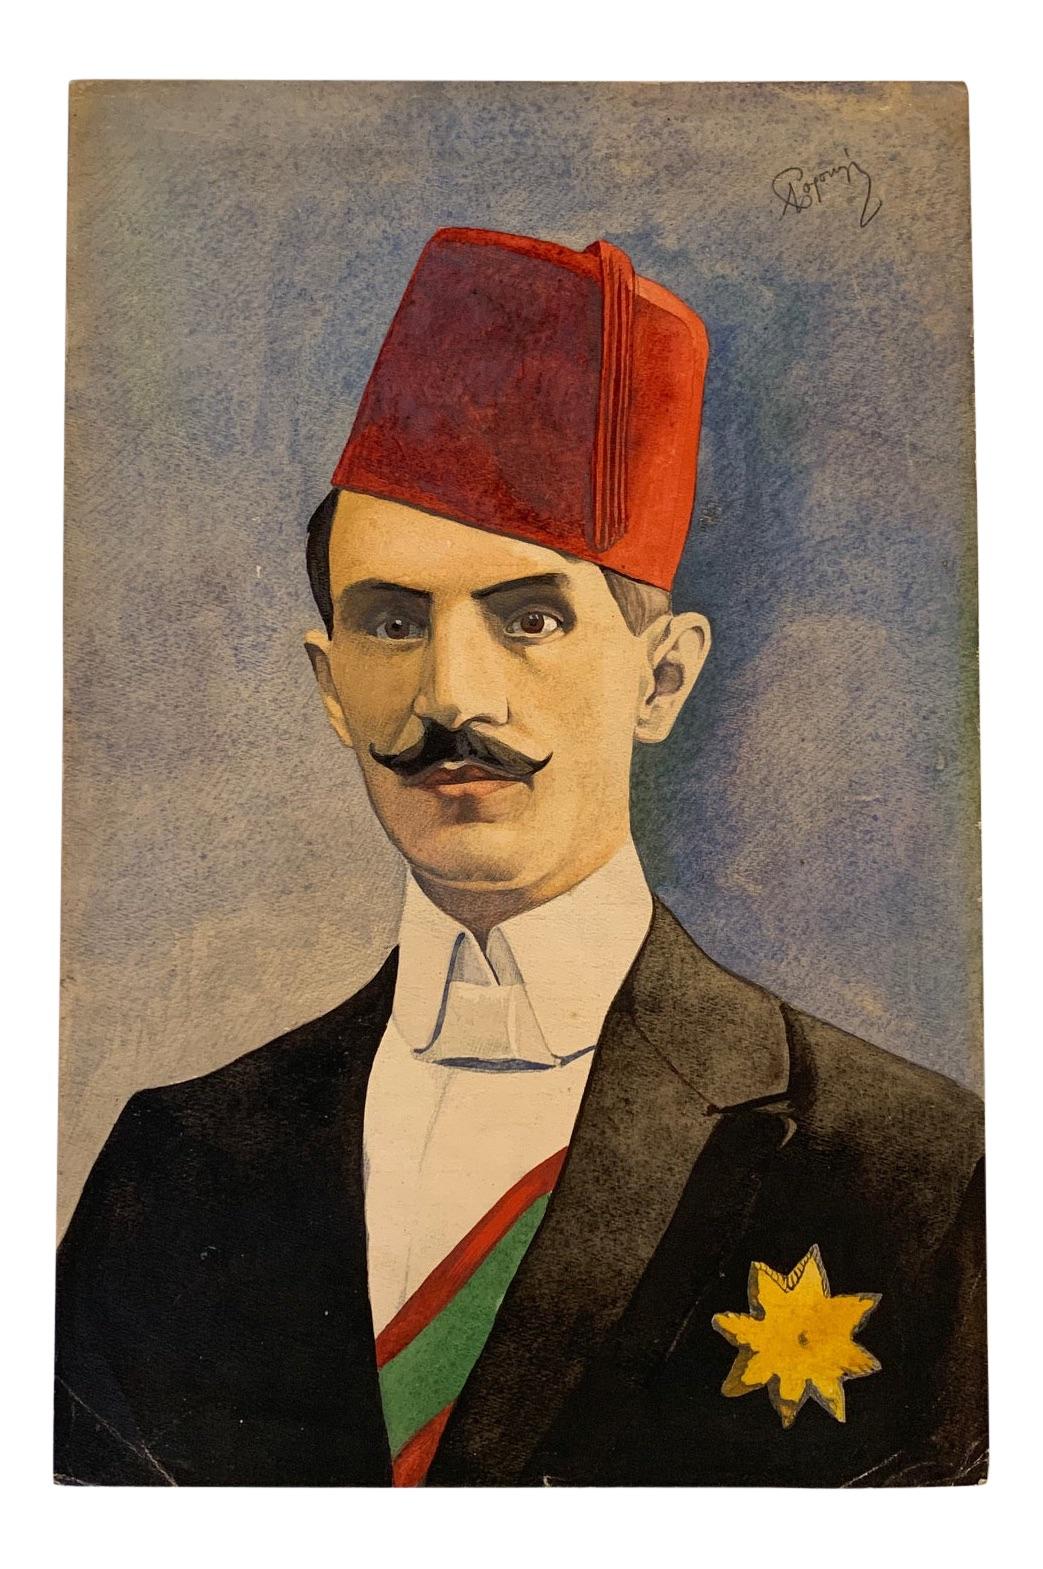 Vintage Turkish Watercolor Portrait of Suited Man With a Fez, Signed by Artist. Circa early 20th century. This piece features a suited gentleman proudly adorned in a sash and eight-point gold star emblem regalia. Beautifully rendered watercolor